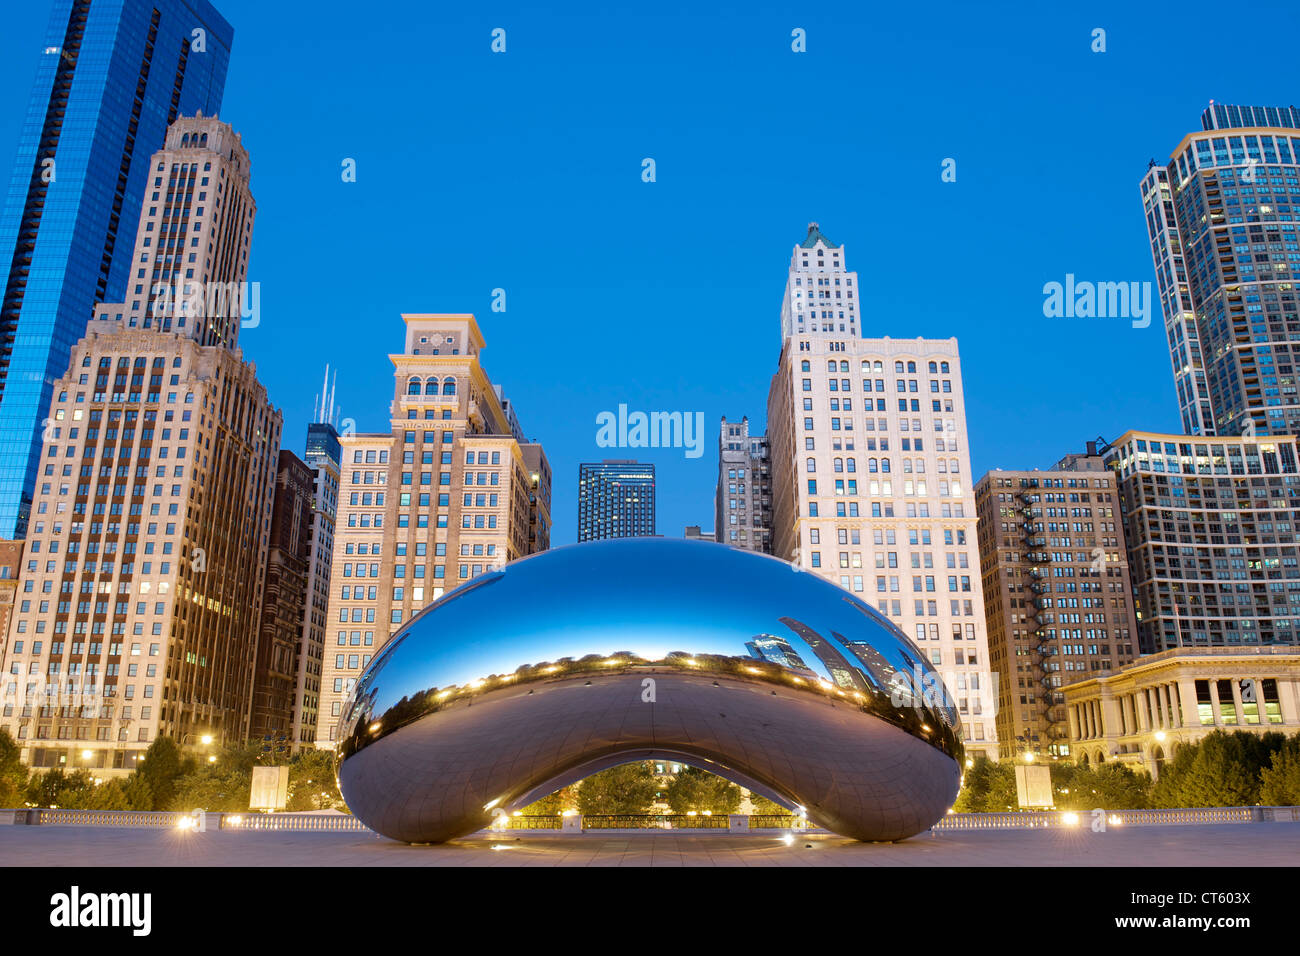 Dawn view of the Cloud Gate sculpture by Anish Kapoor in the Millennium Park in Chicago, Illinois, USA. Stock Photo